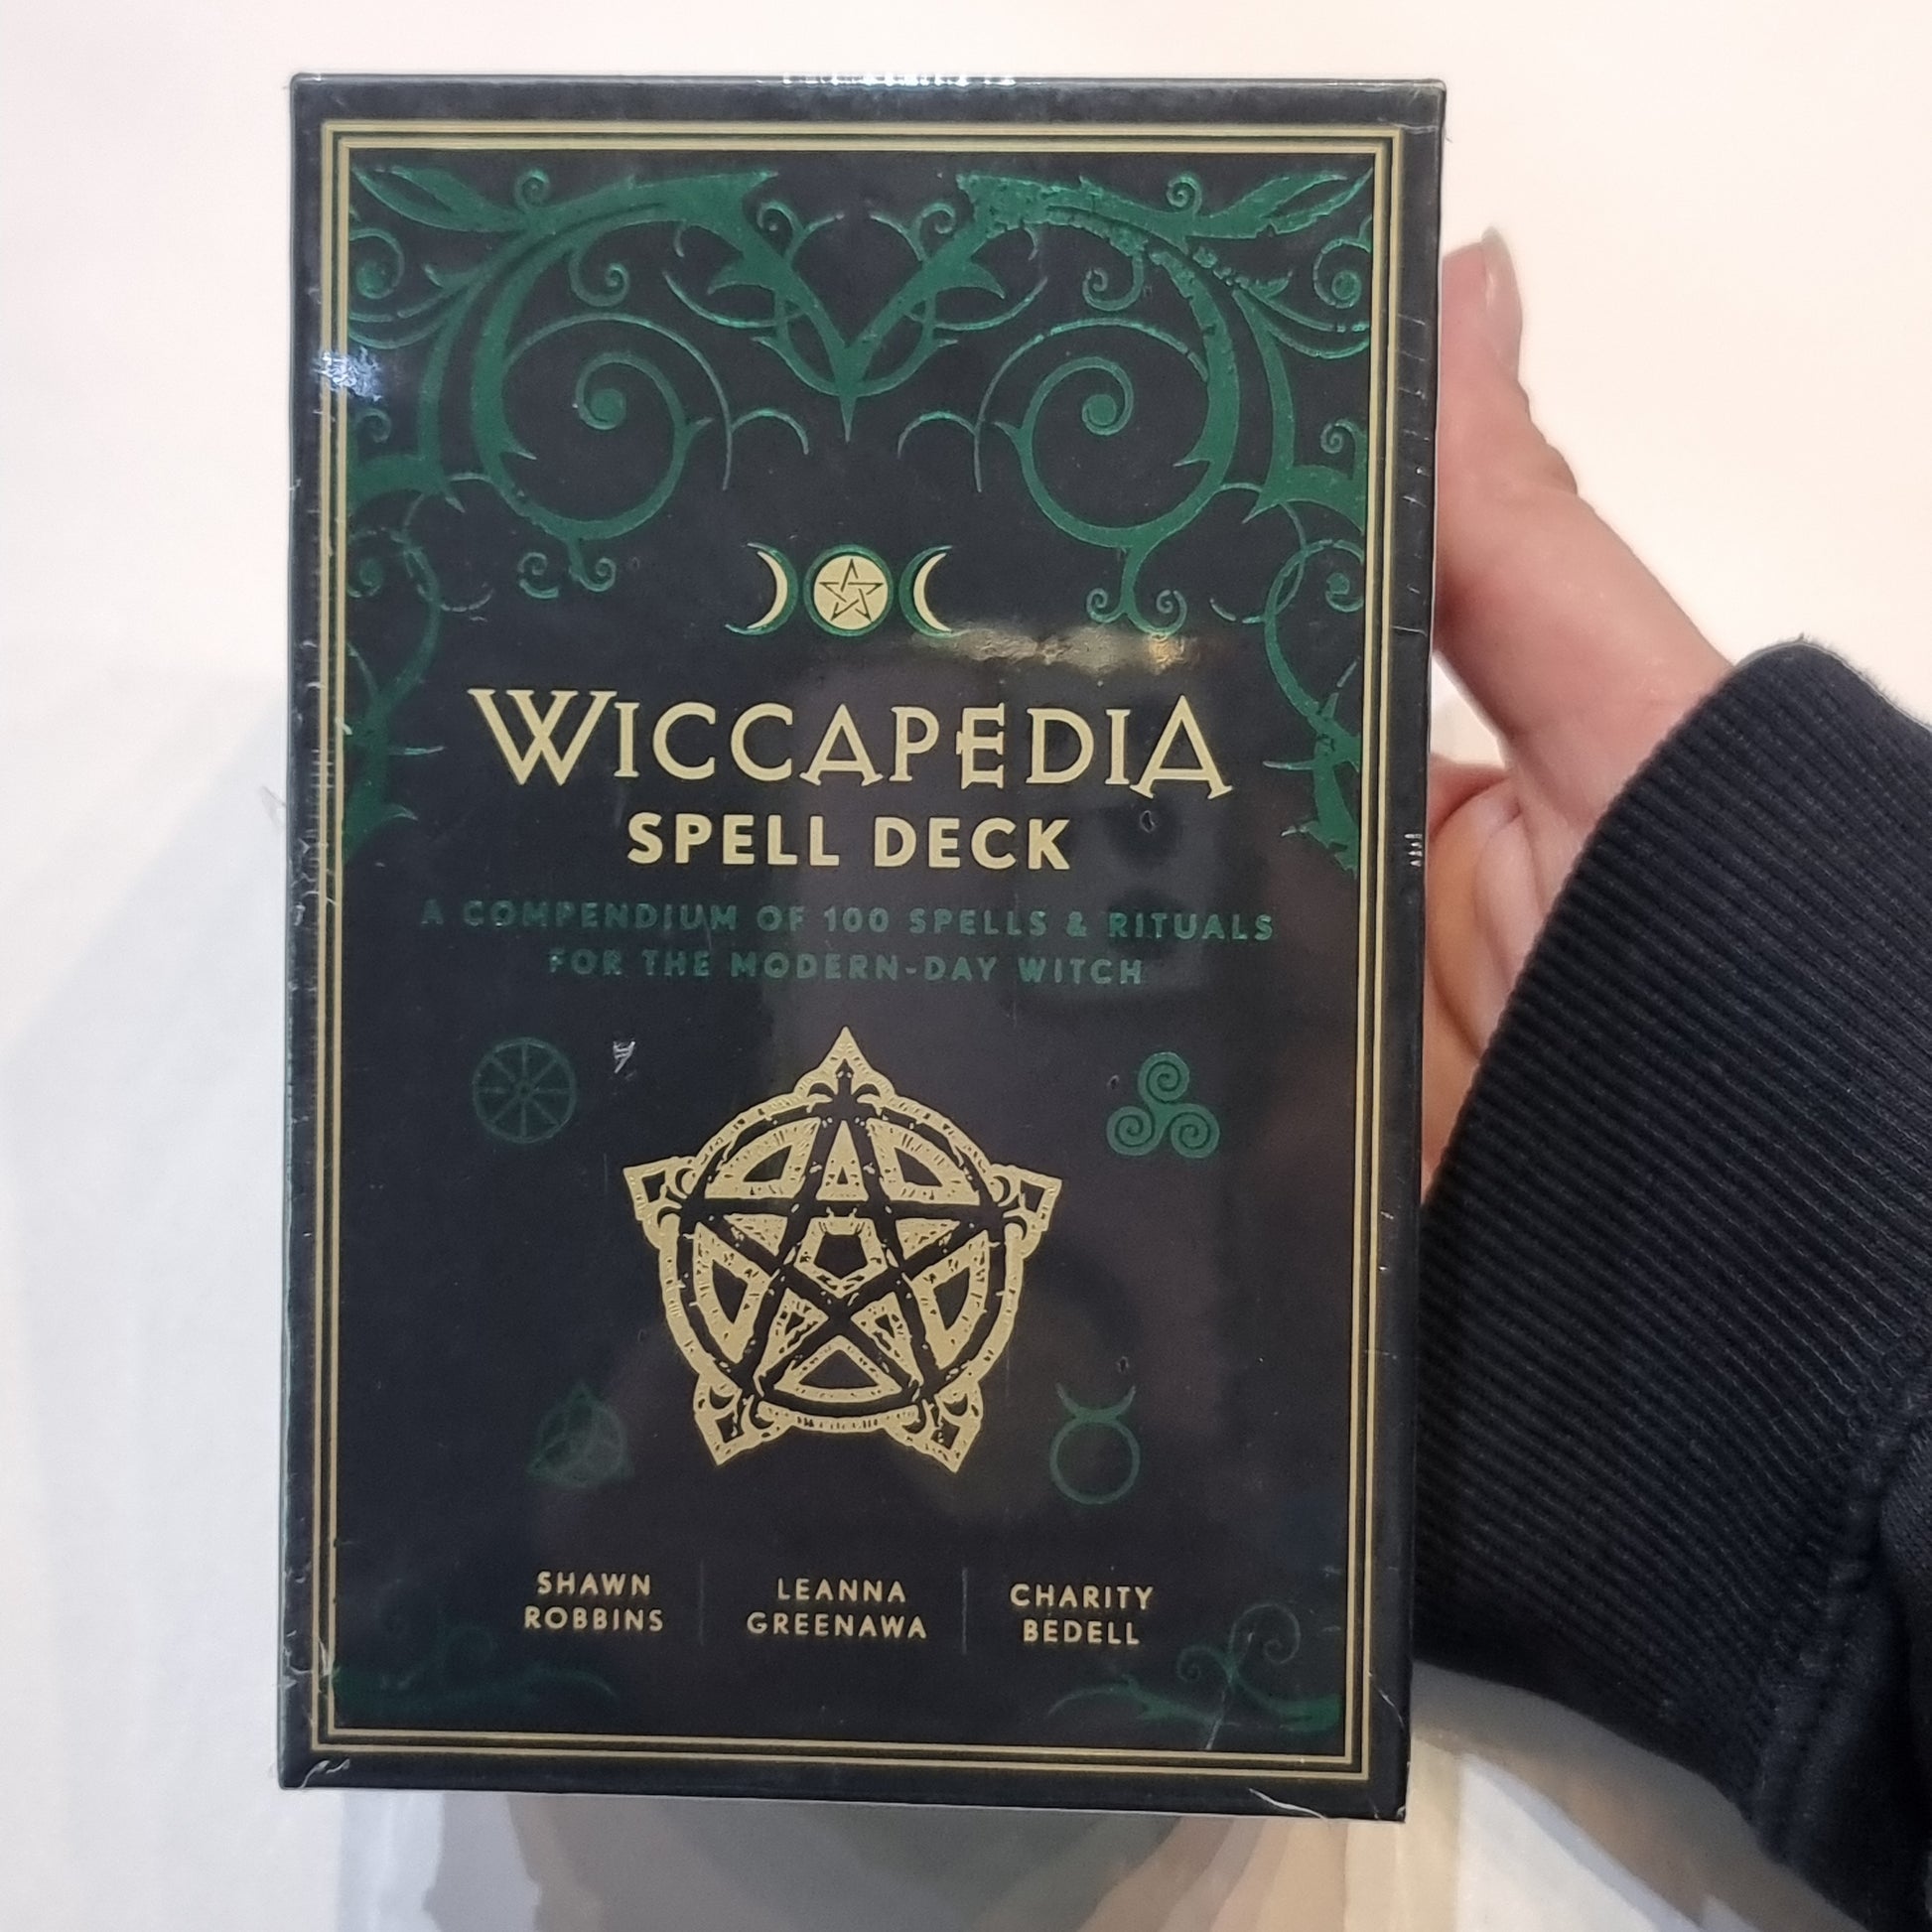 Wiccapedia spell deck - Rivendell Shop